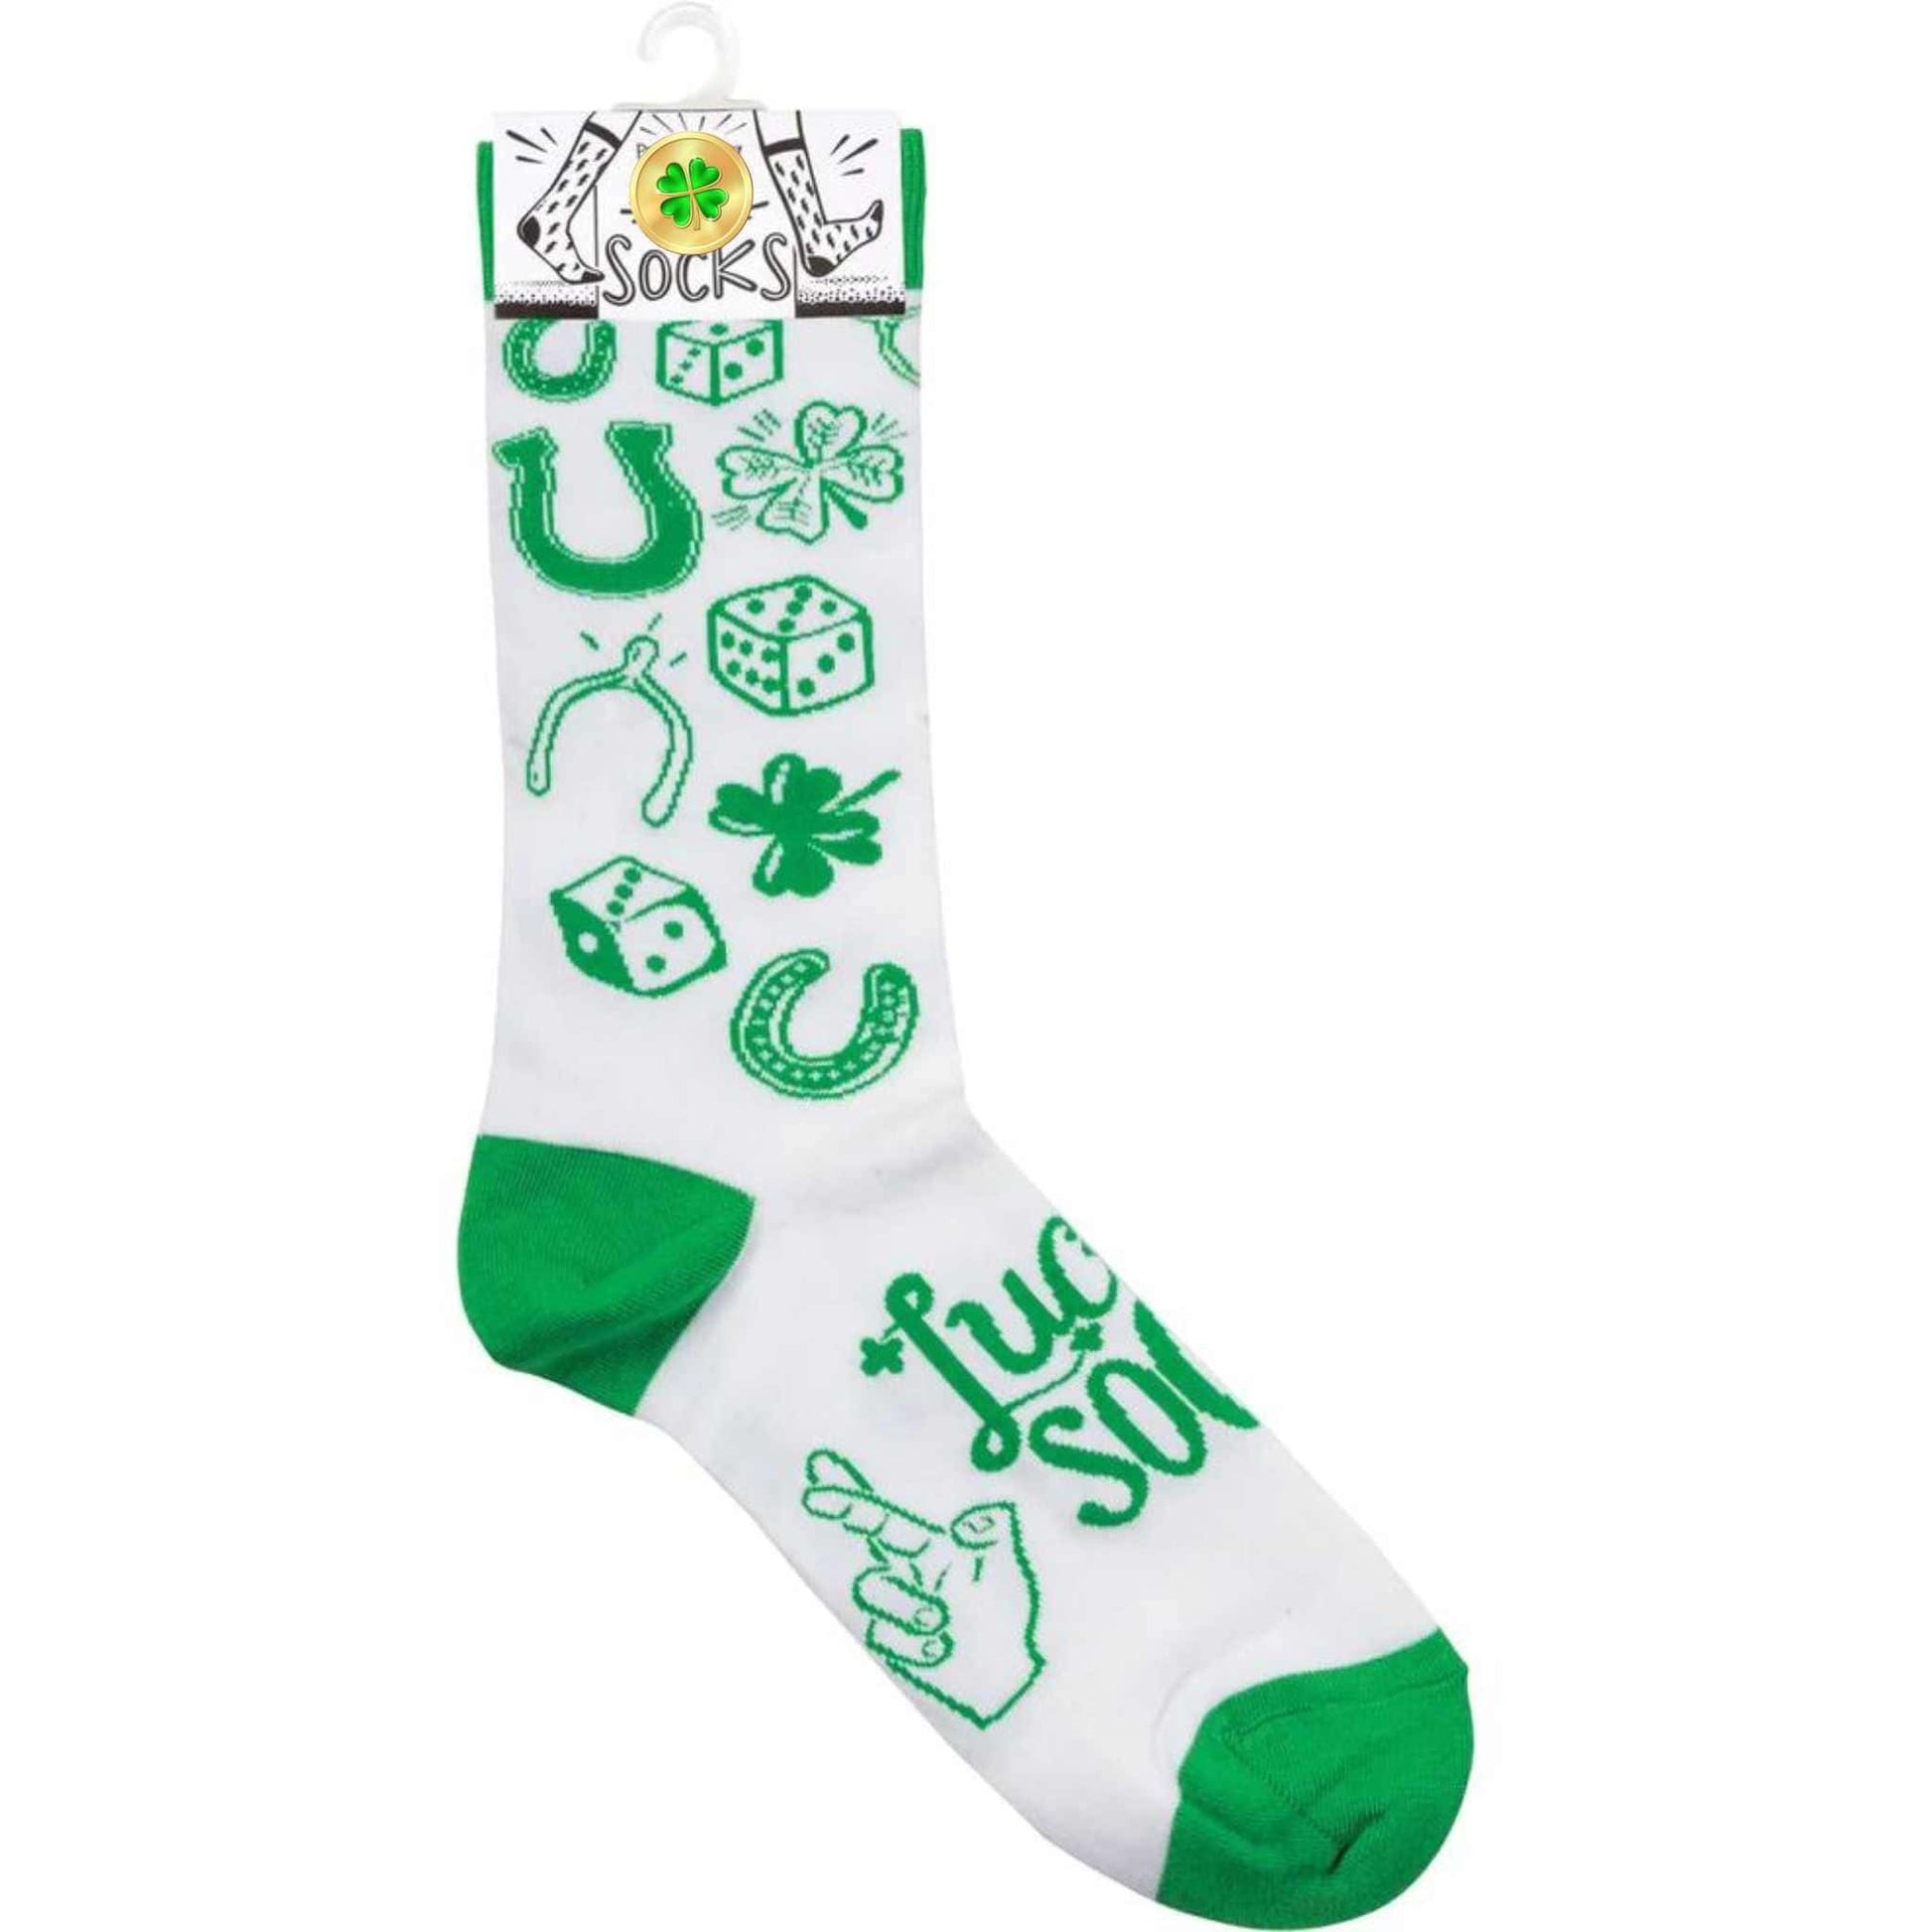 Socks One Size Fits Most Socks - Your Lucky Socks PBK- 34067